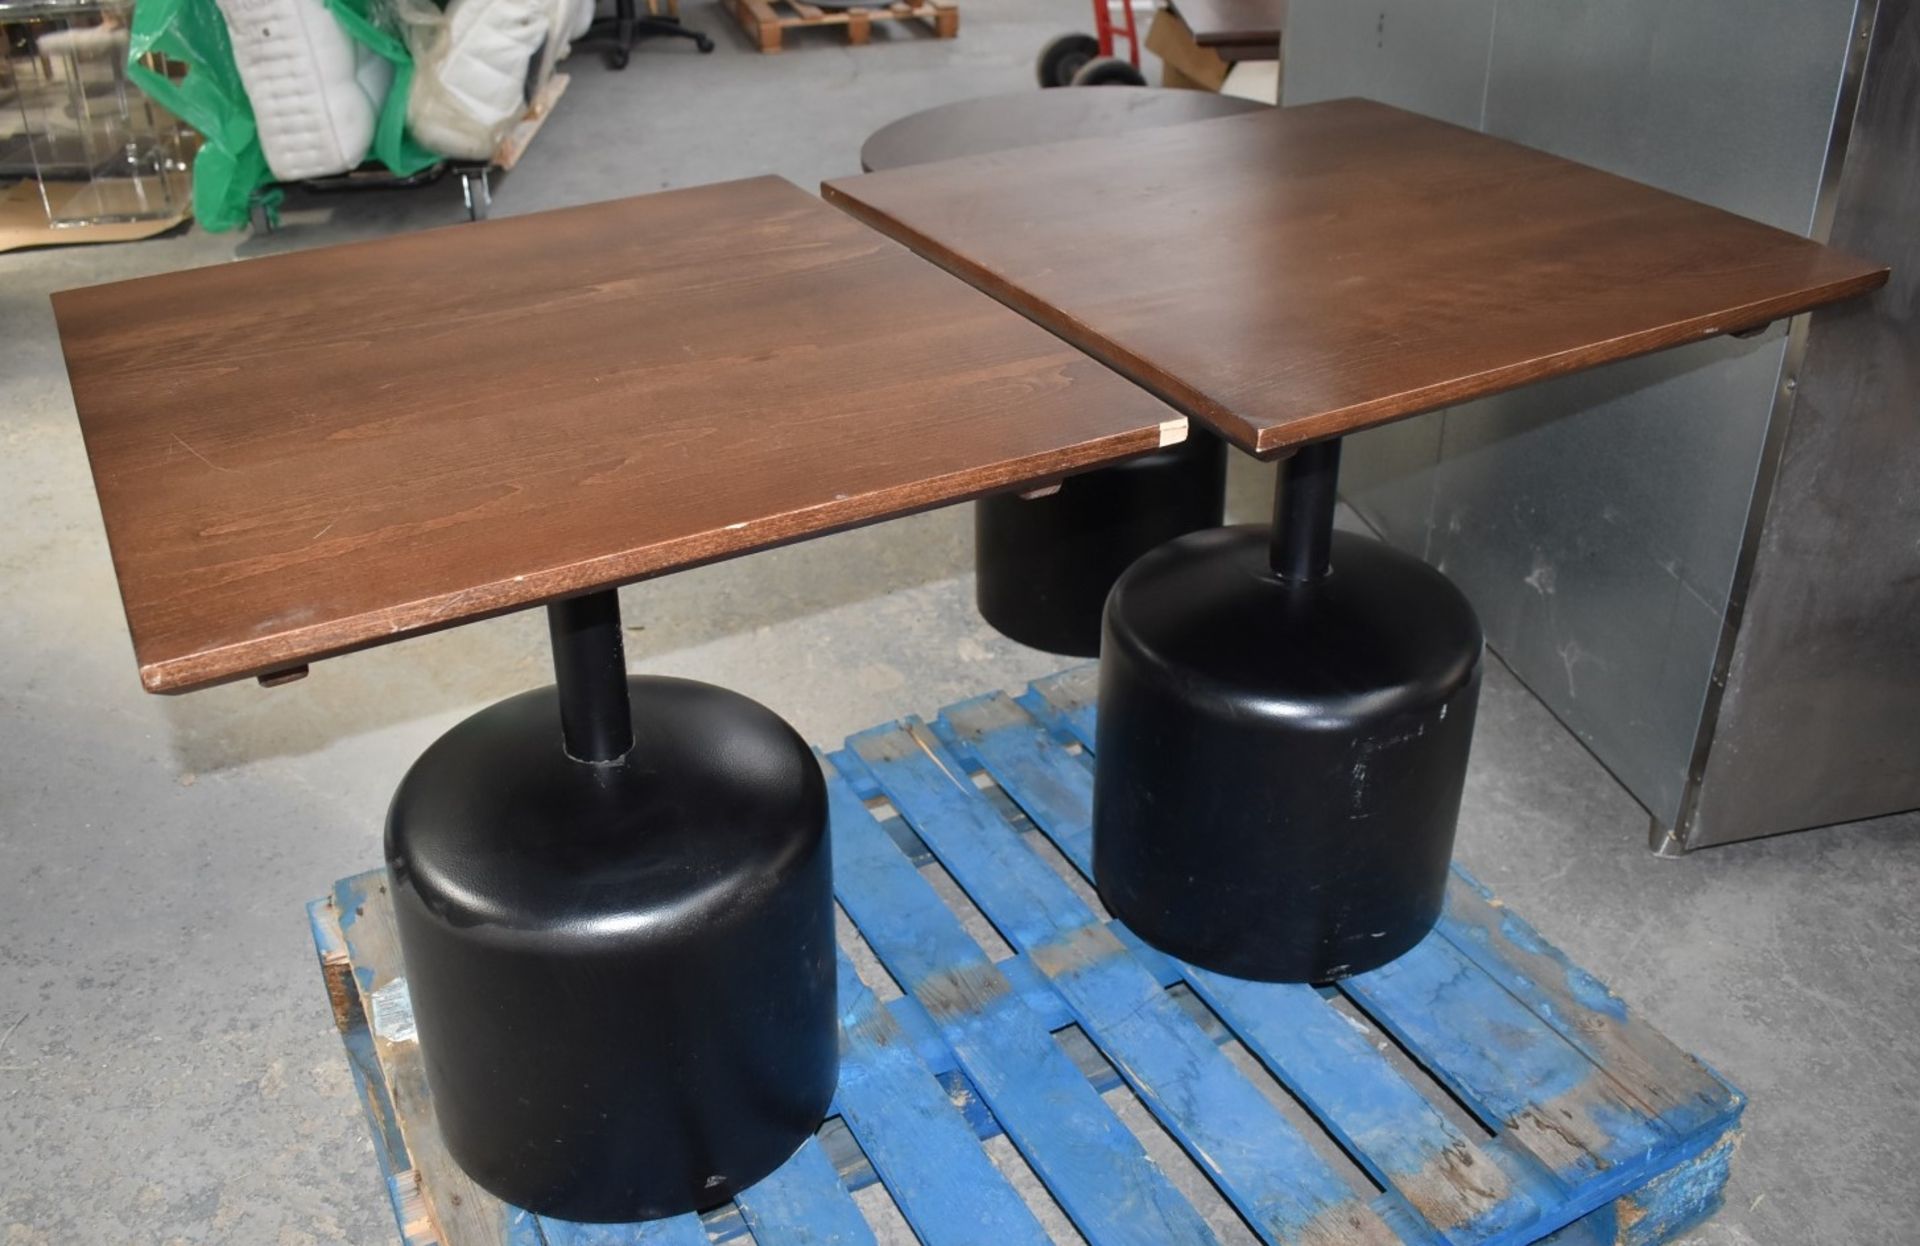 14 x Commercial Restaurant Tables Features Large Black Pedestals and Dark Stained Wooden Tops - Image 17 of 23